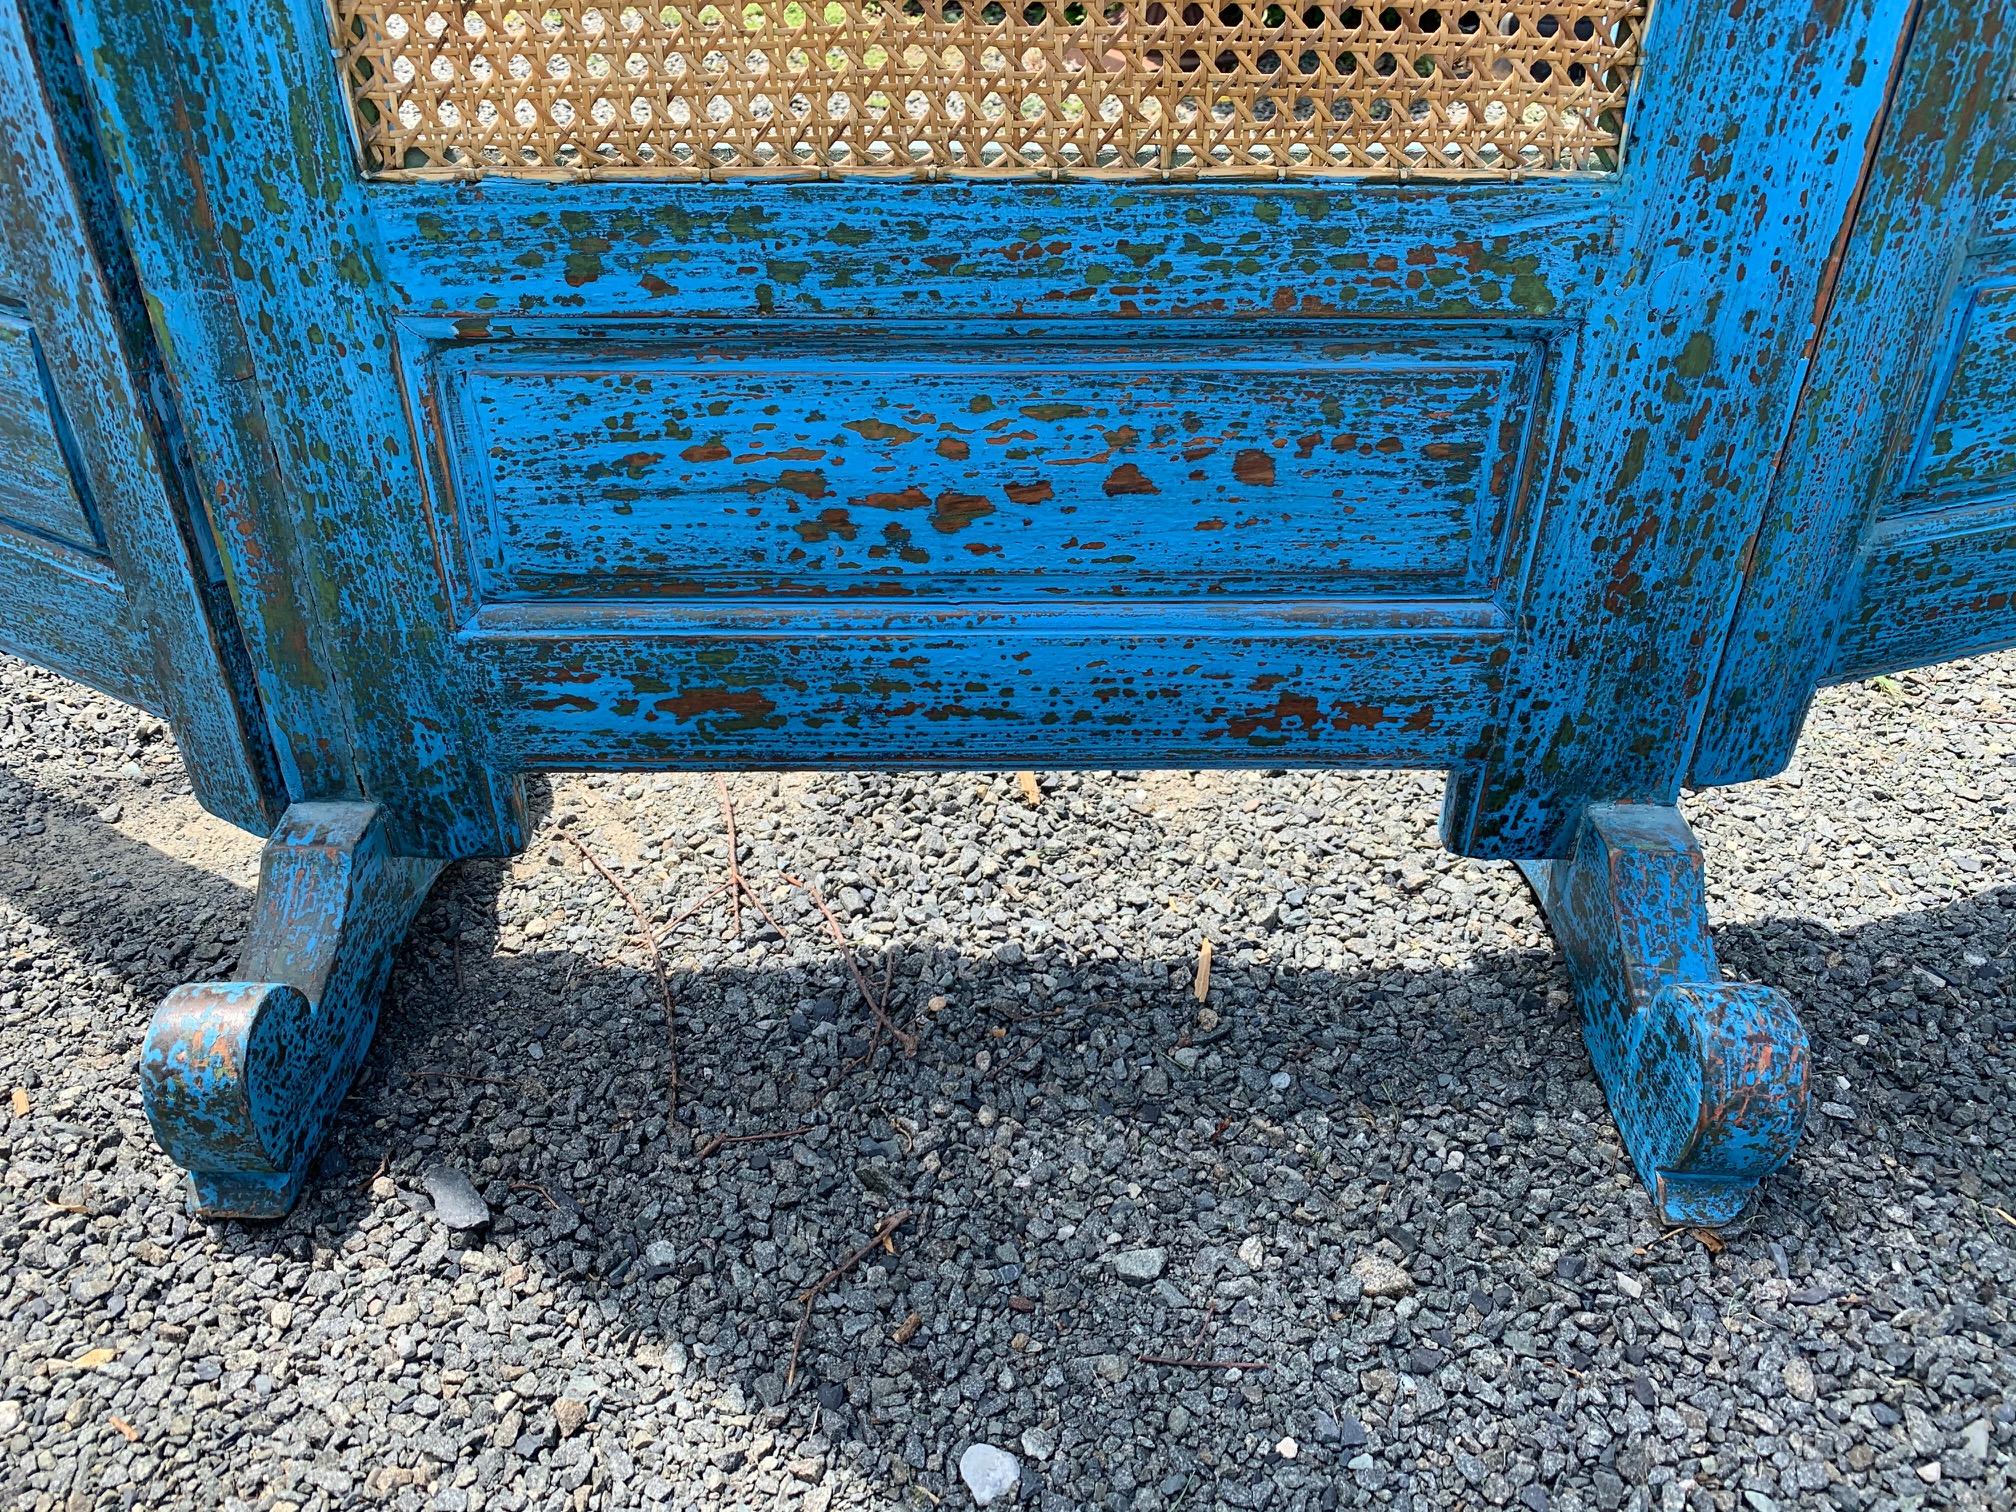 Sensational Turquoise Scrubbed Wood and Caned 3 Panel Screen For Sale 1